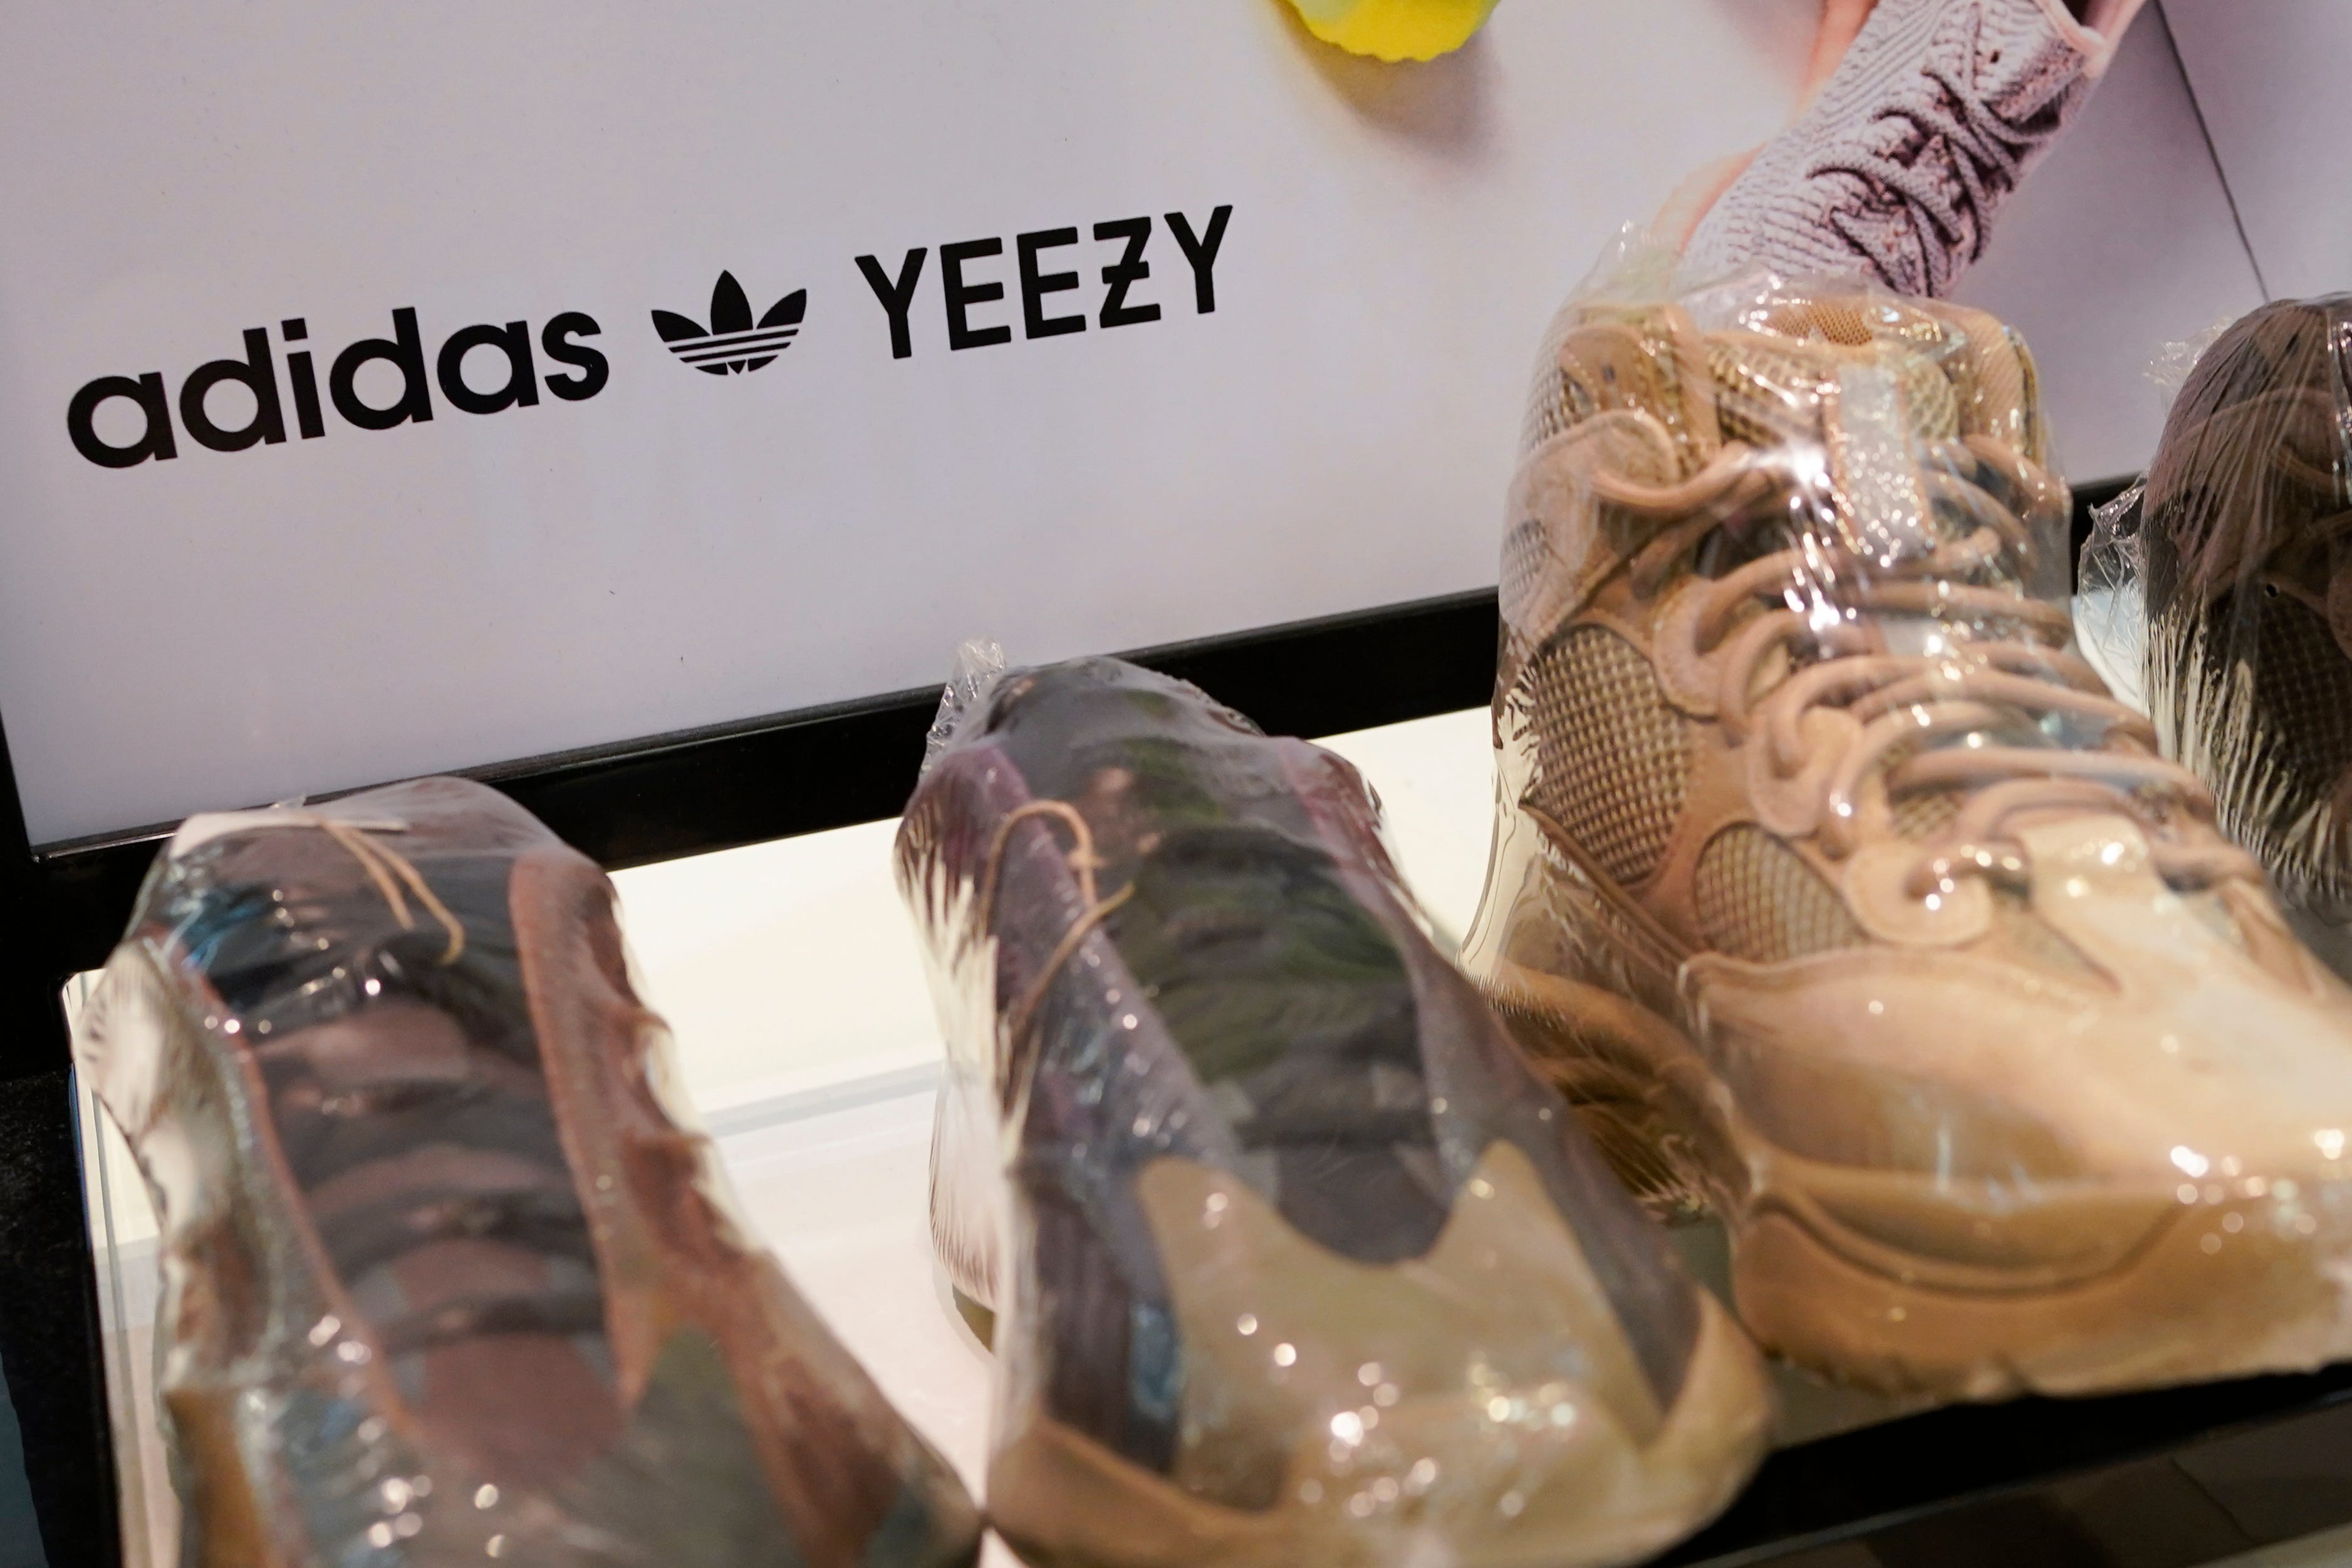 arrebatar menta infinito Adidas says dropping Ye's Yeezy shoes could cost it over $1 billion